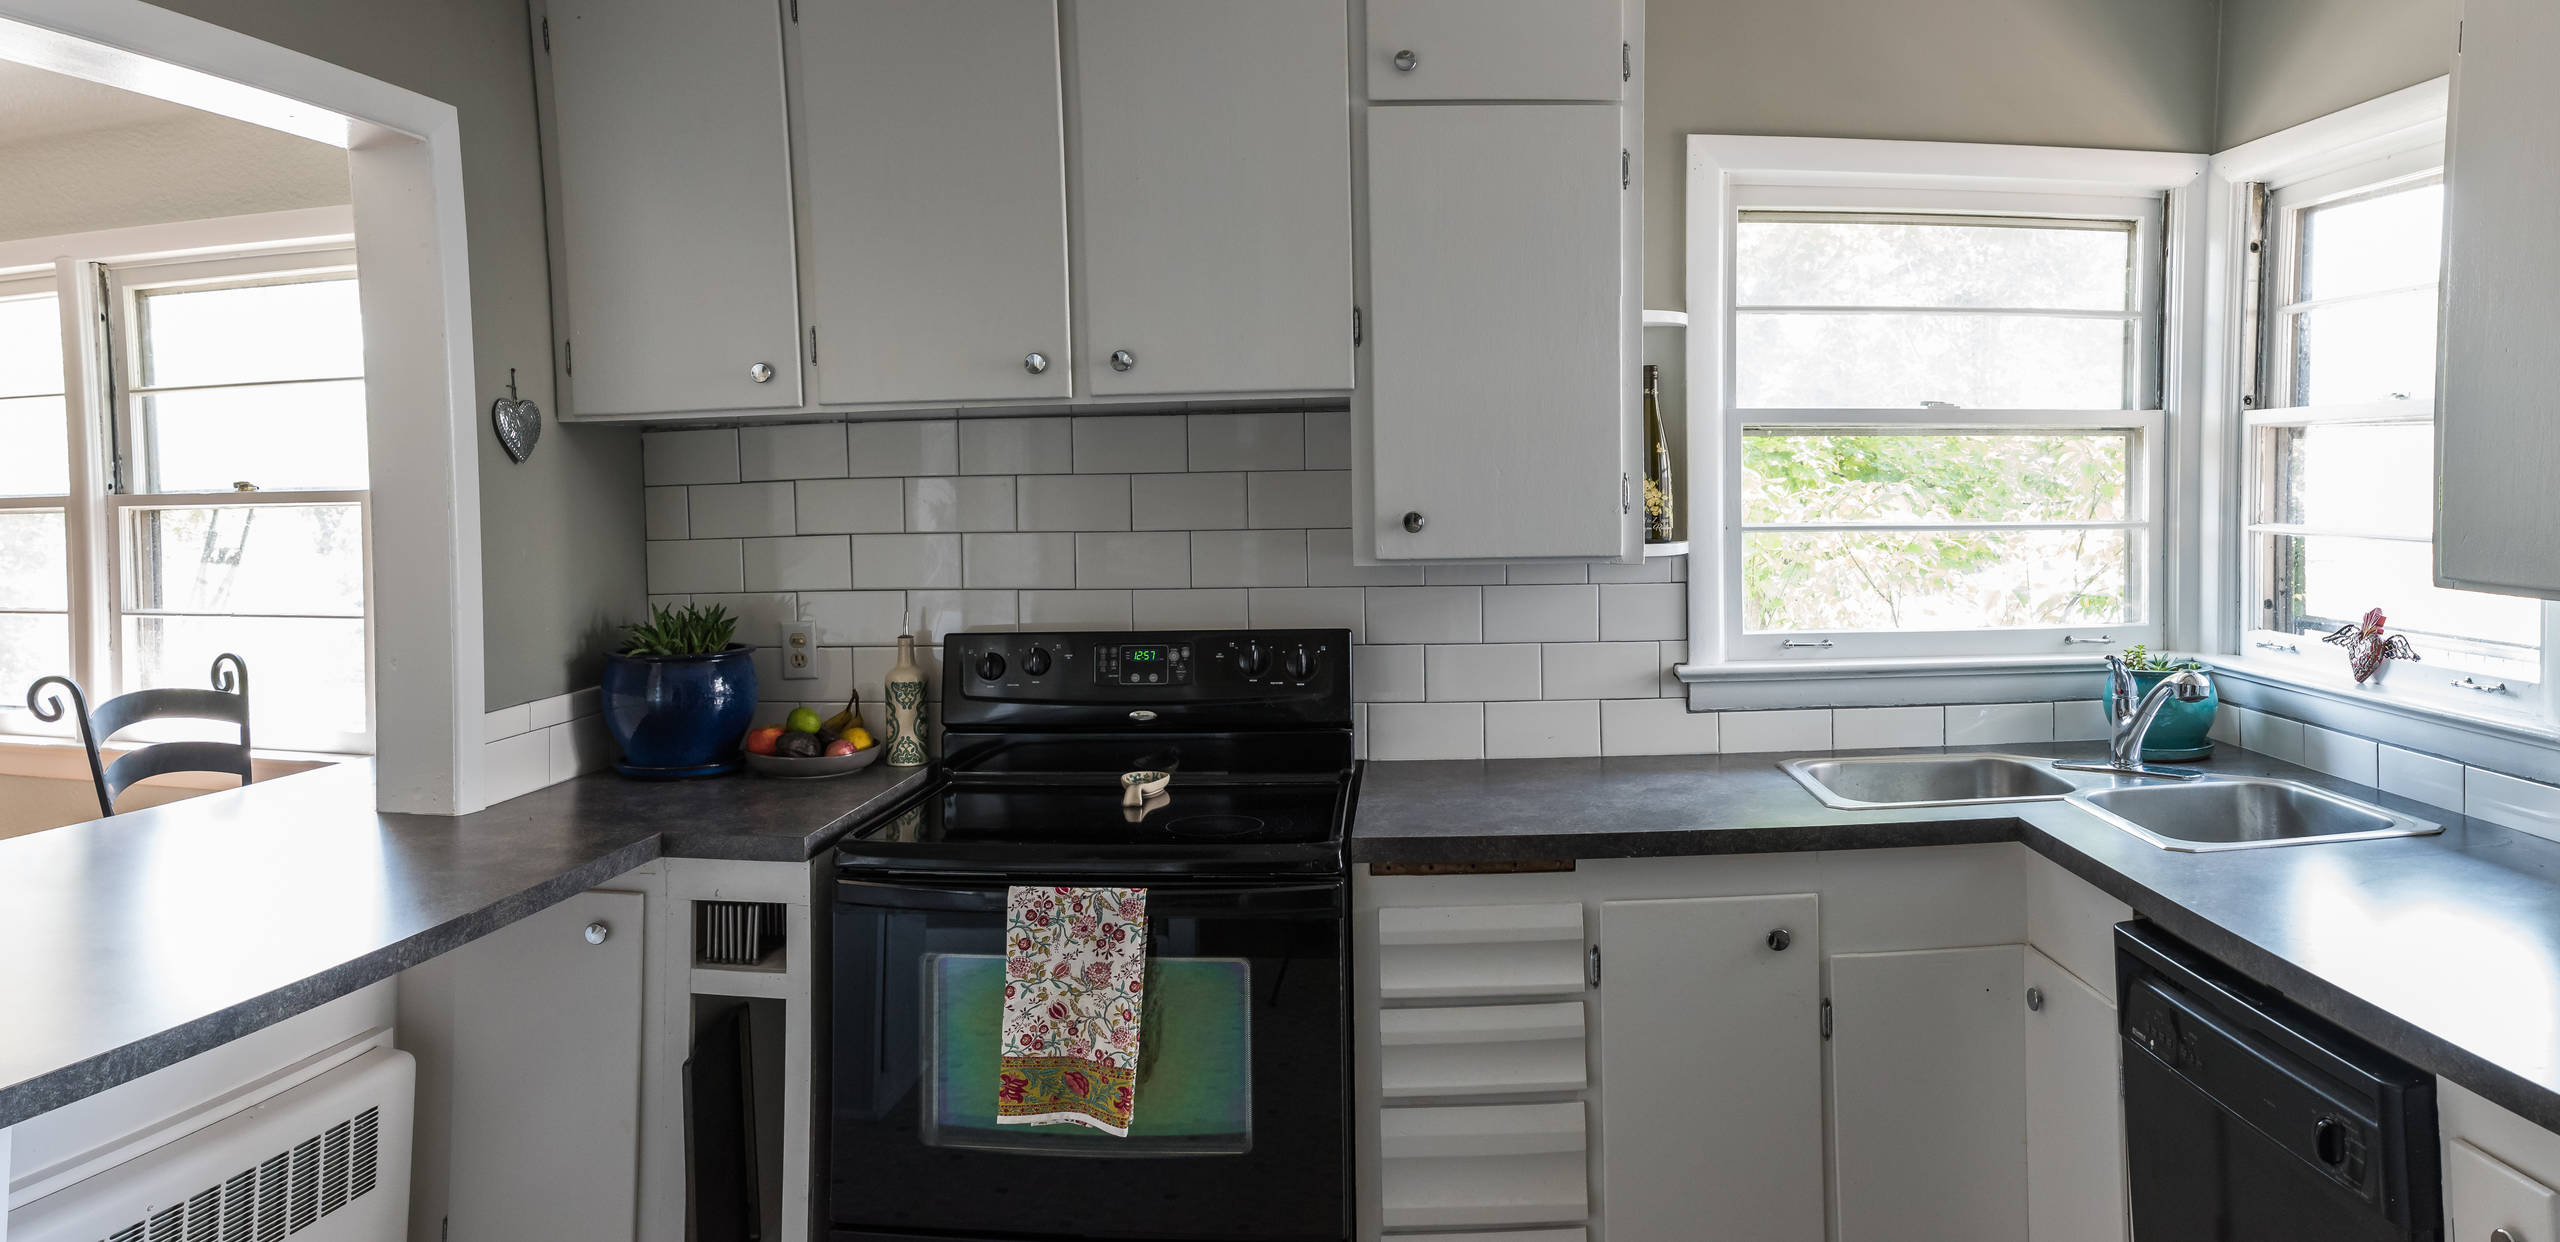 Kitchen Cabinet Refinish and Countertop Replacement